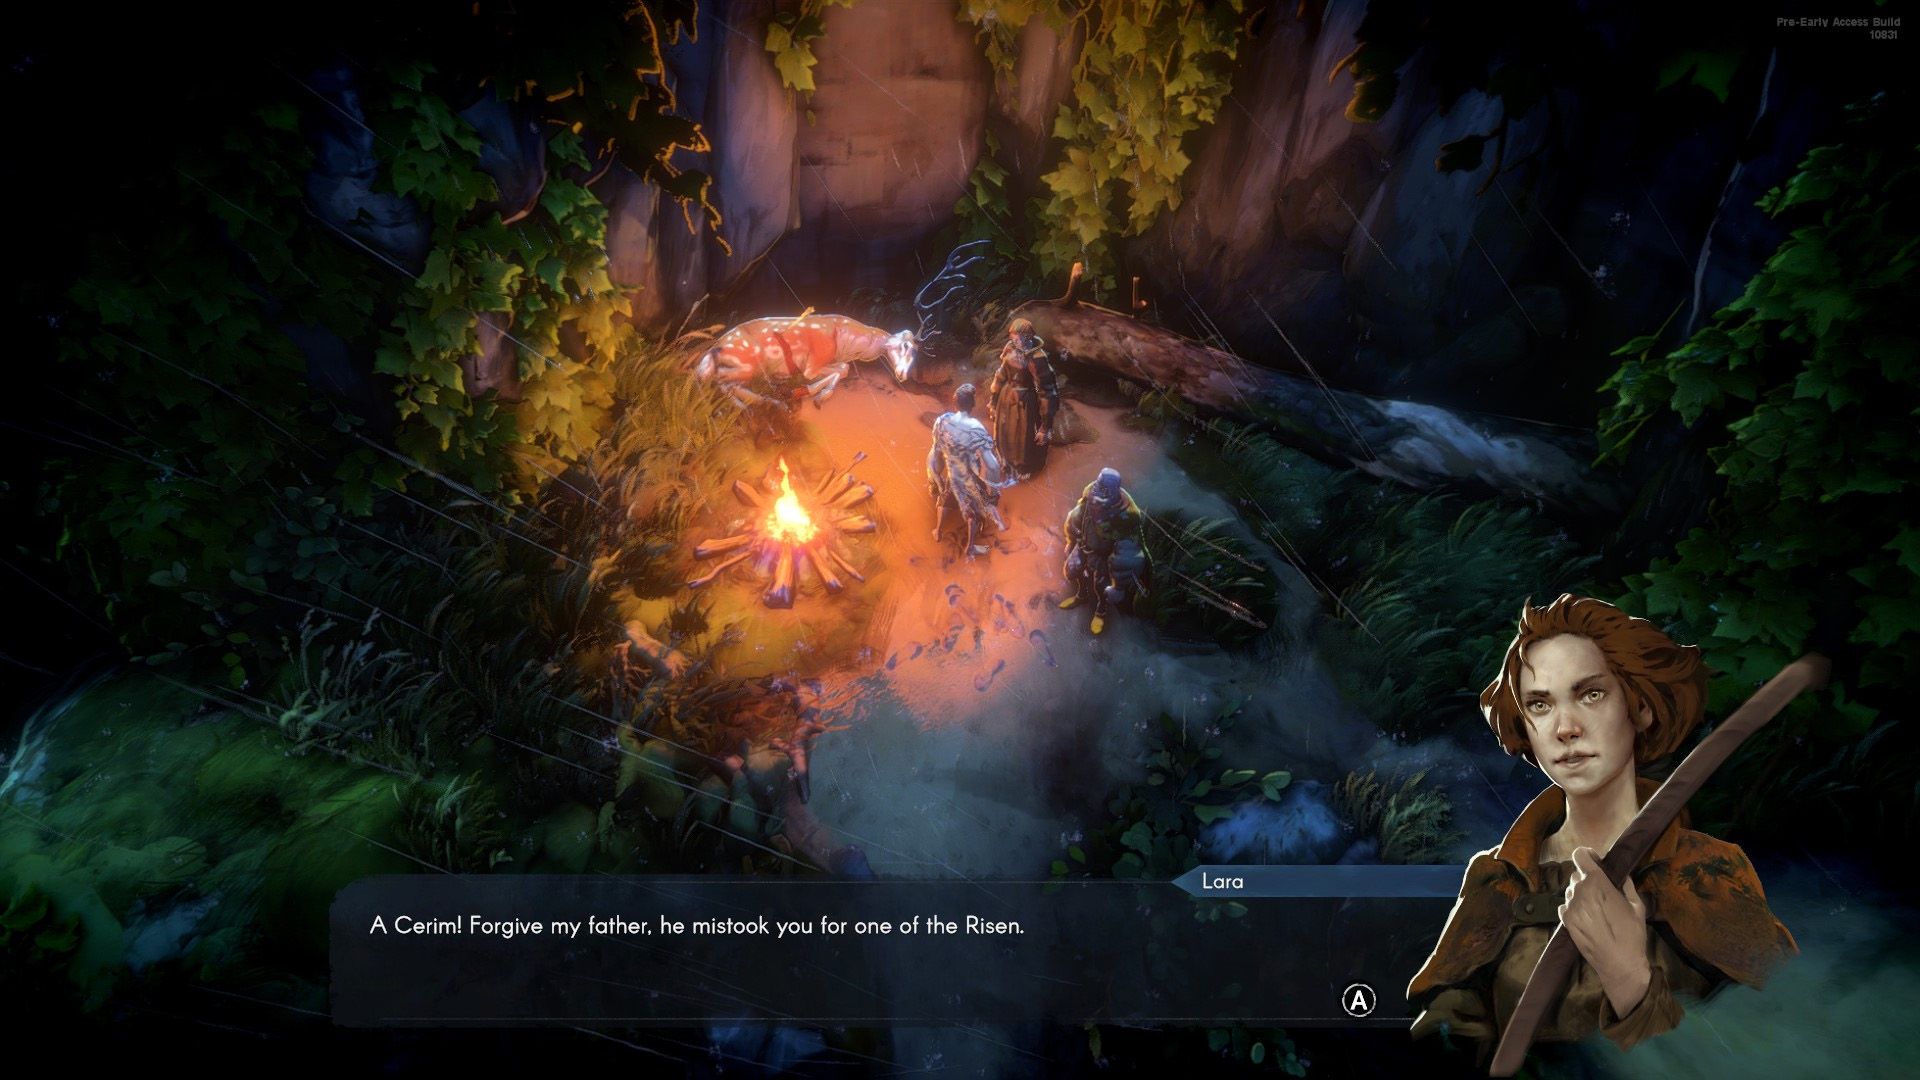 NPC Lara from No Rest For The Wicked speaking to the player character by a fire.